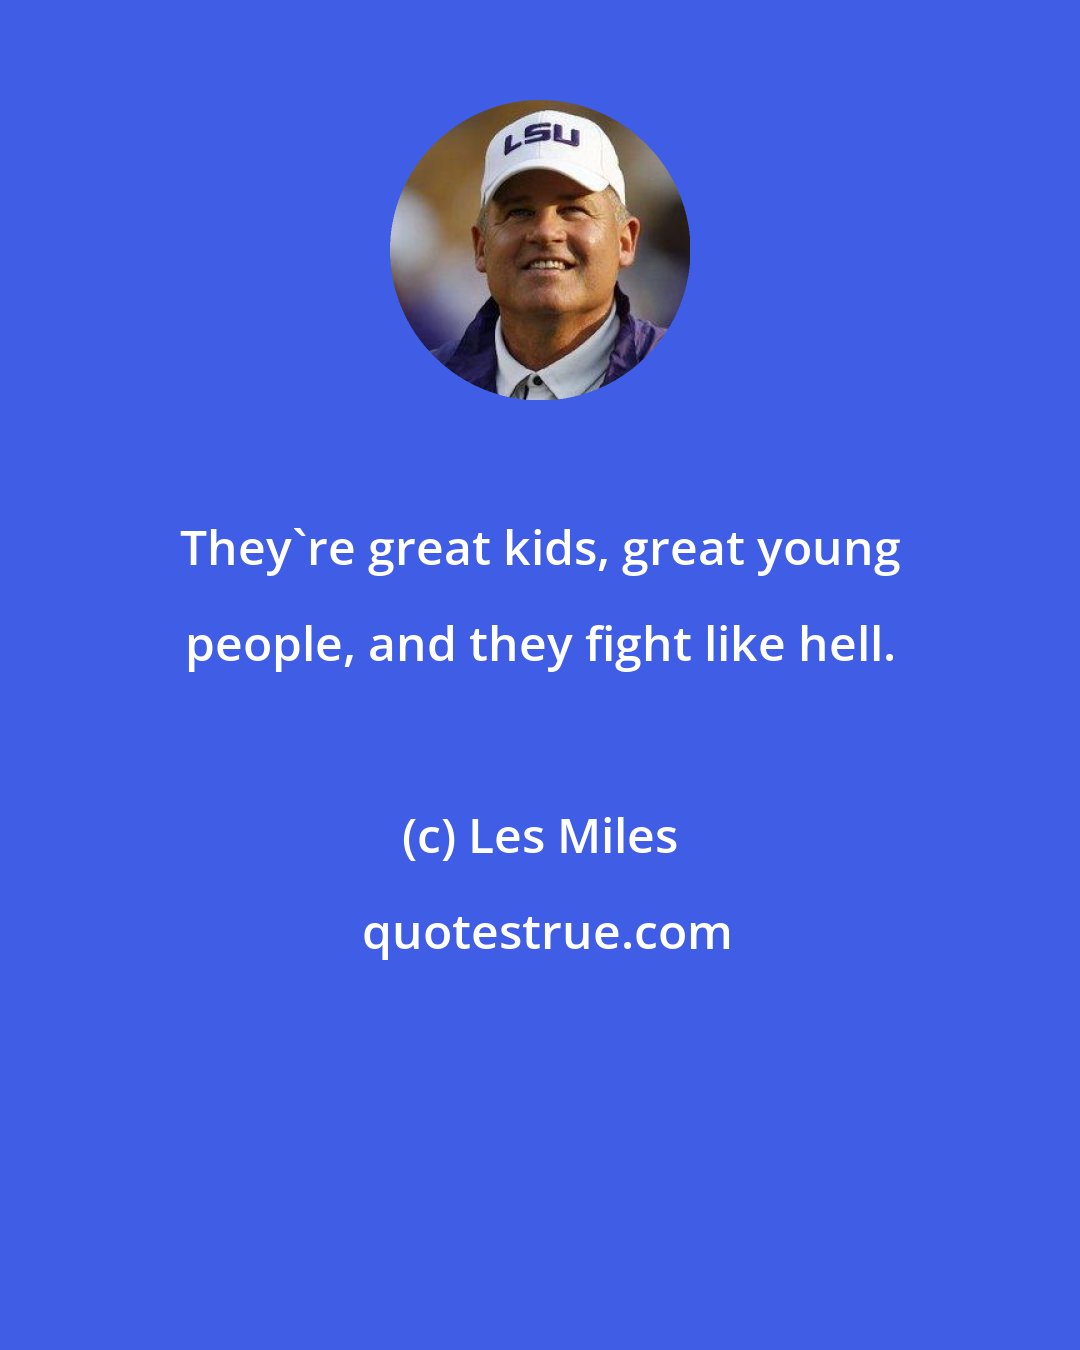 Les Miles: They're great kids, great young people, and they fight like hell.